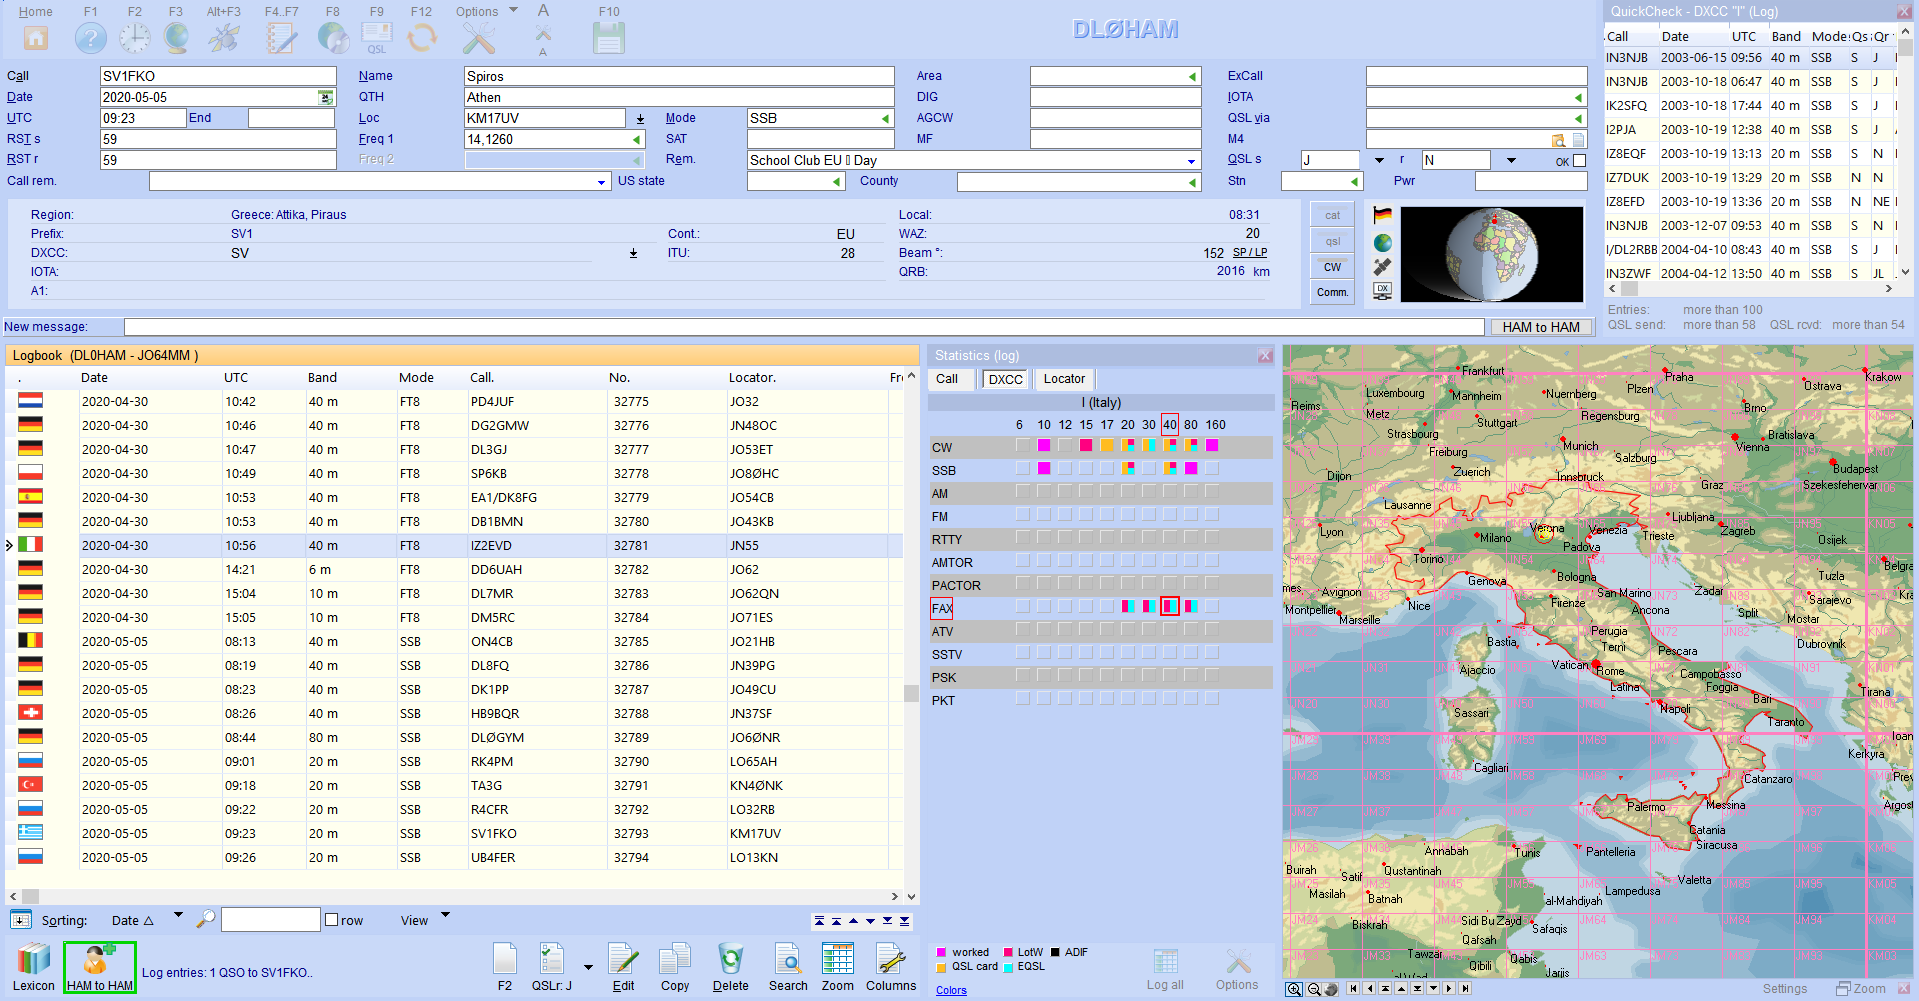 qso-input layout with quickcheck map and statistics hamoffice my amateur radio logbook